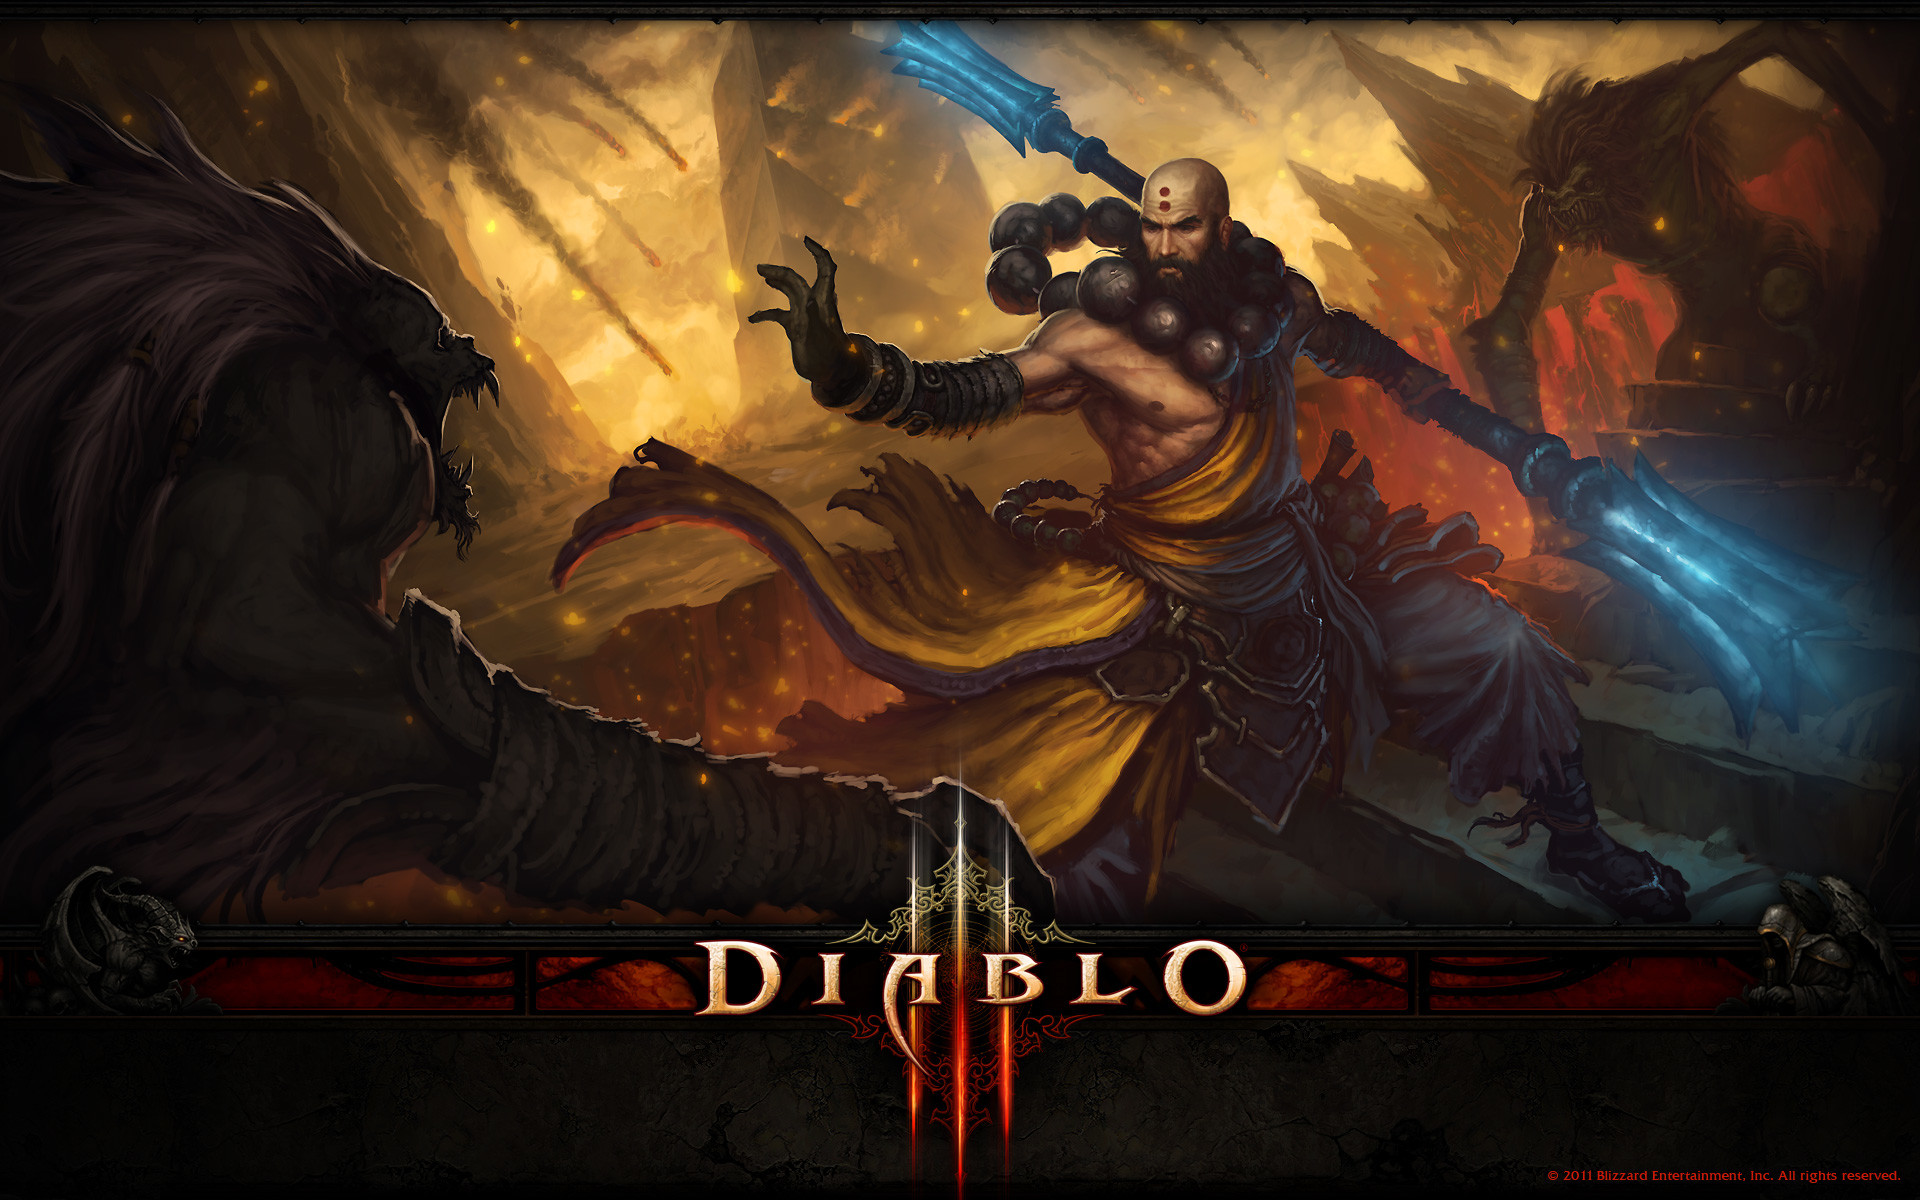 1920x1200 Diablo 3 Wallpaper [and/or share your work][Tyrael add] - Diablo III Forums